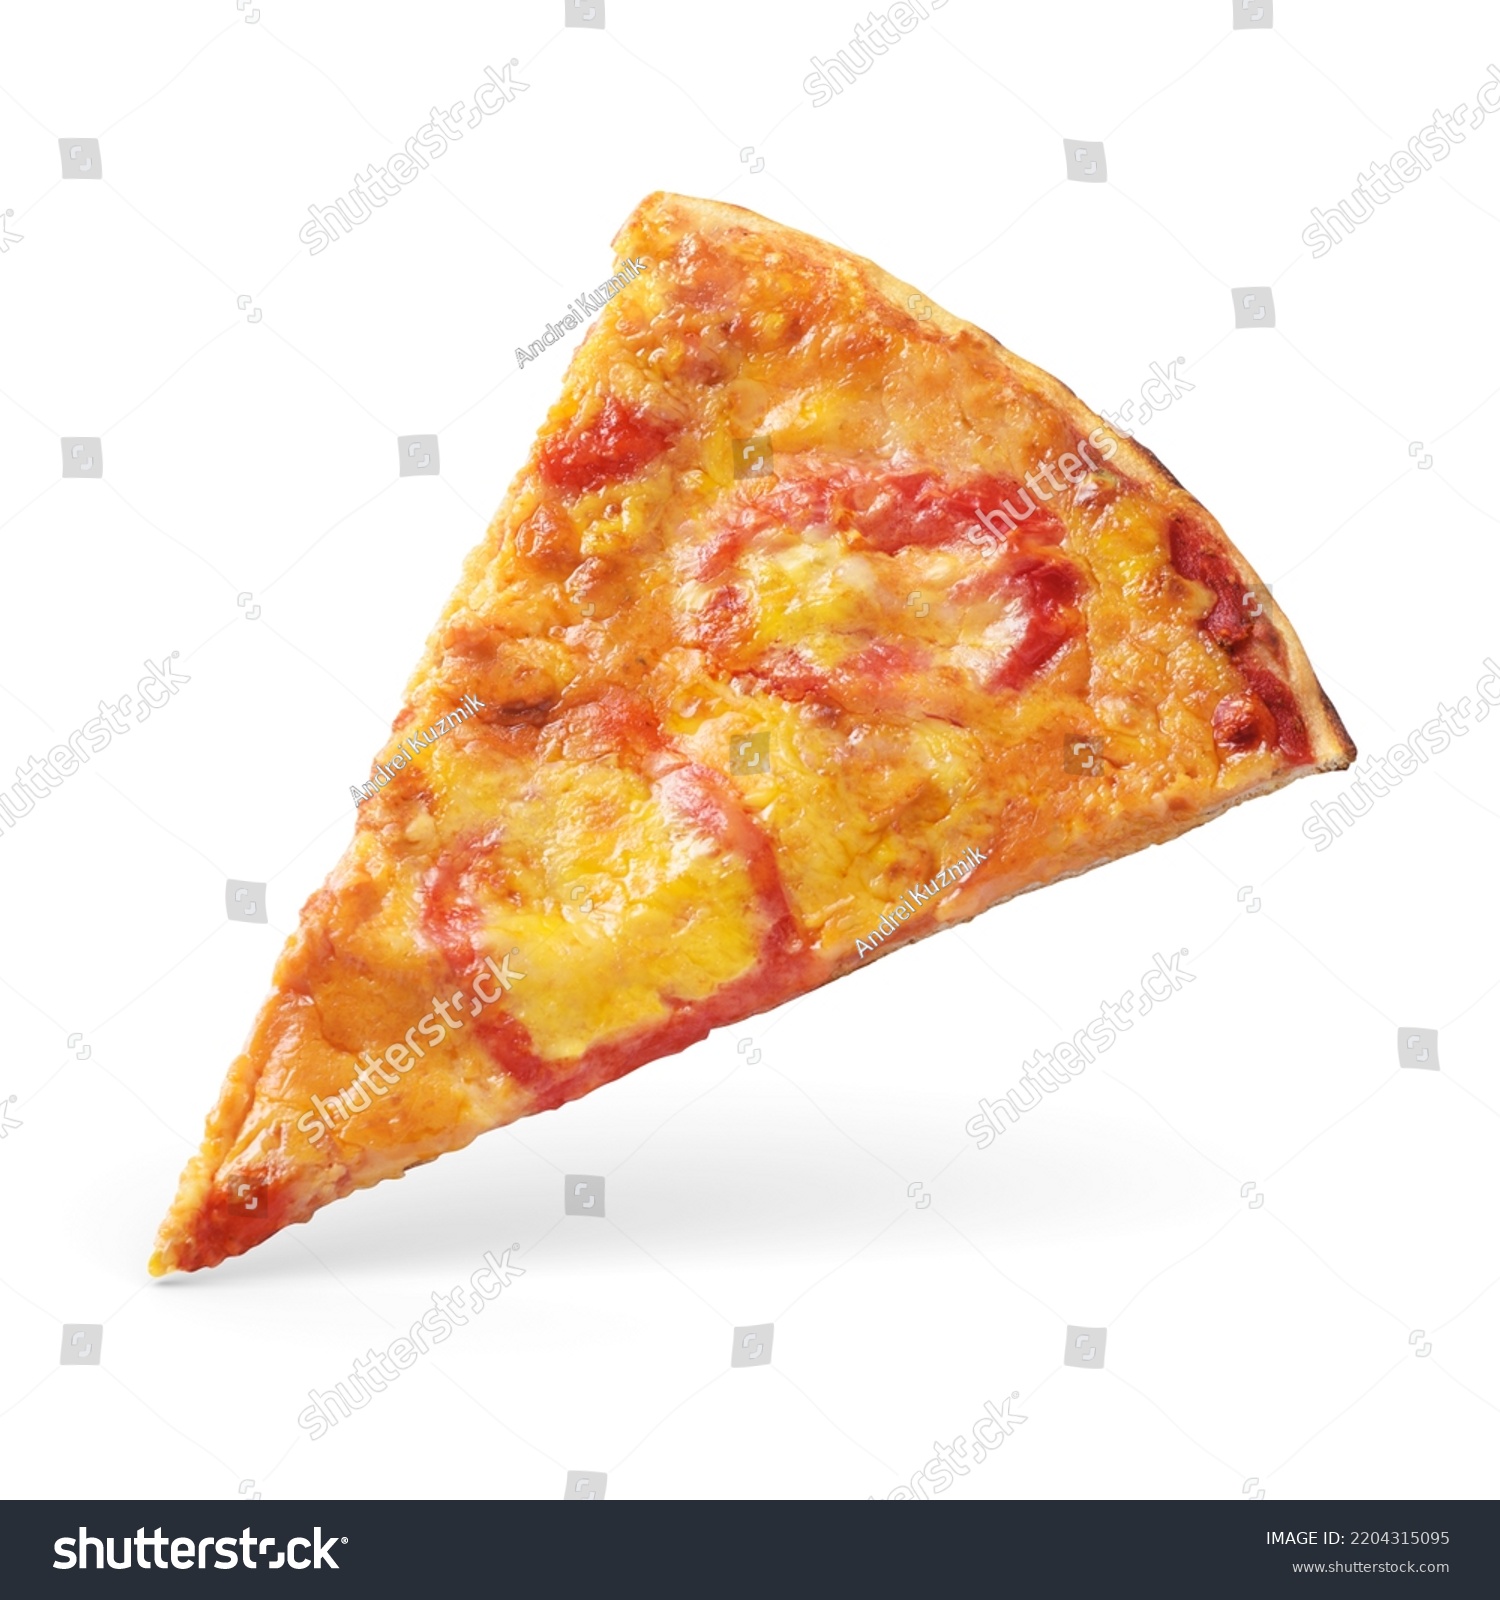 Piece of Neapolitan pizza Margherita isolated on white background. Image for menu or poster. #2204315095